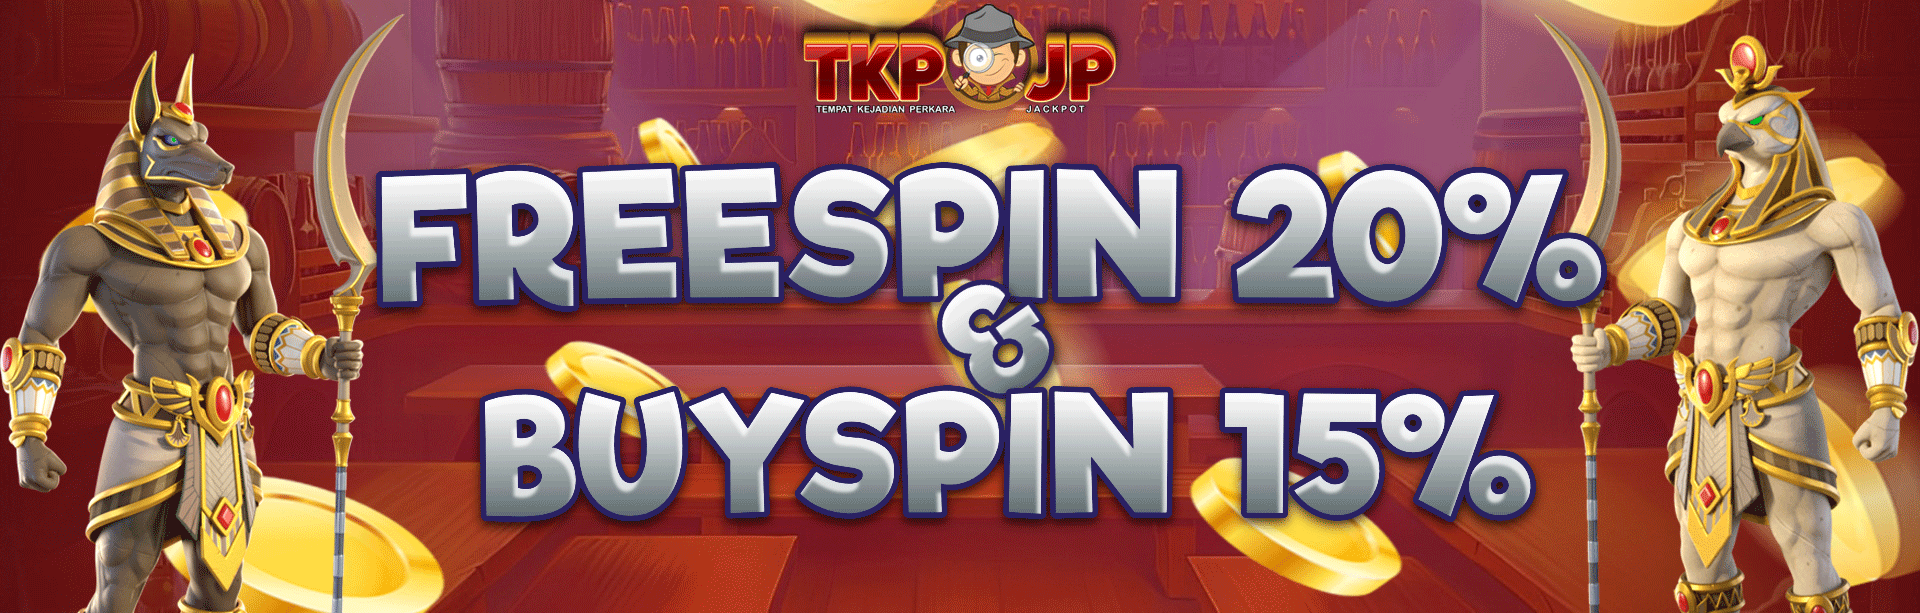 EVENT FREESPIN BUYSPIN